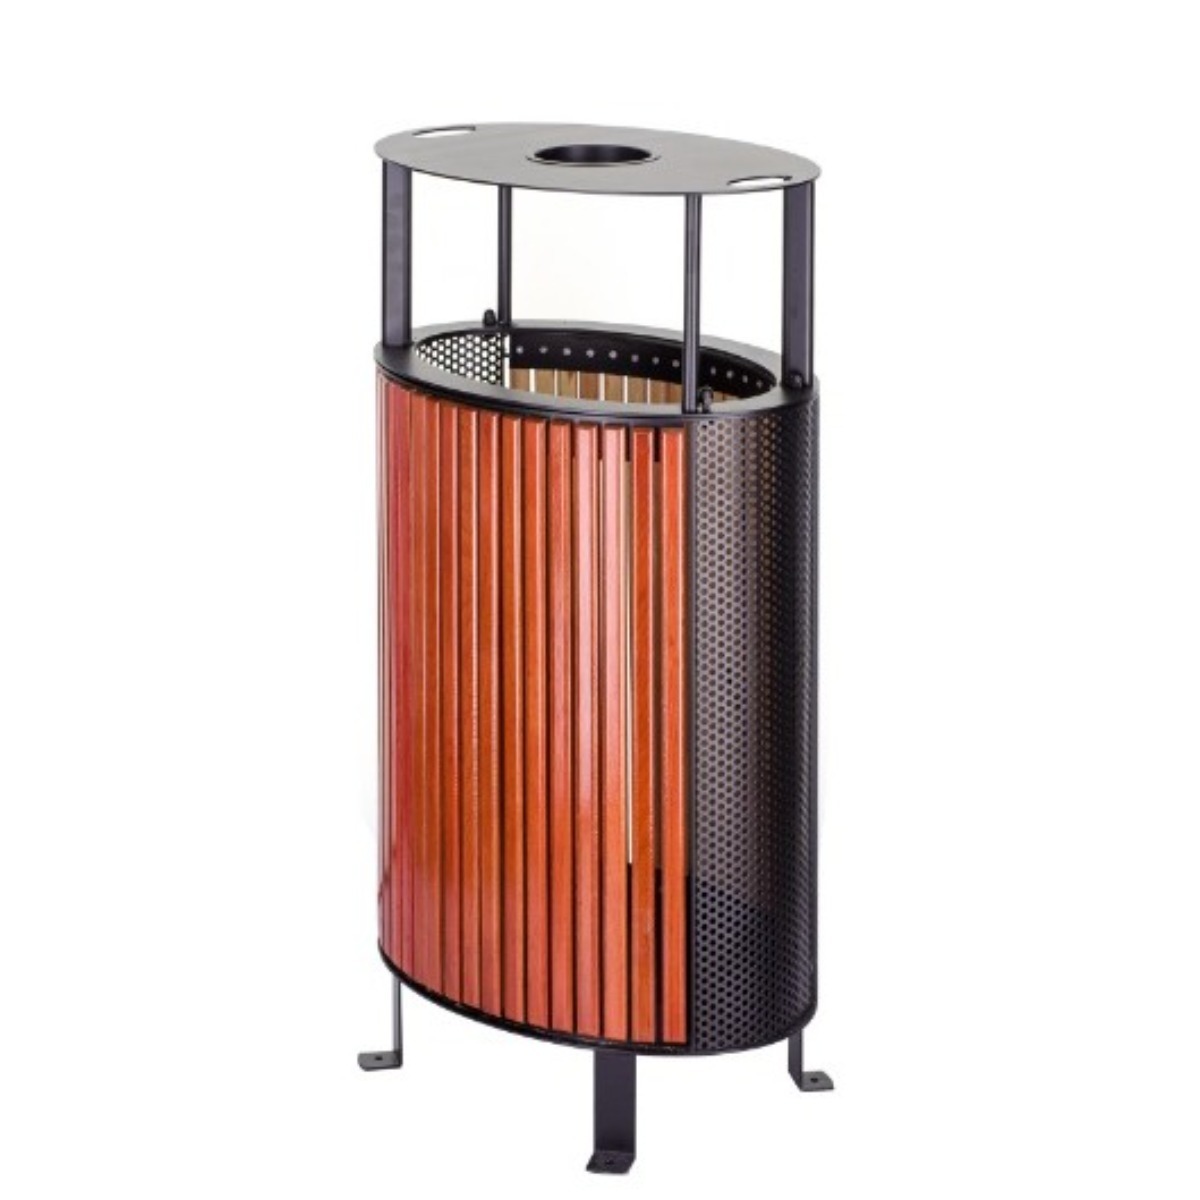 AB-504 Wood Open Space Trash Can